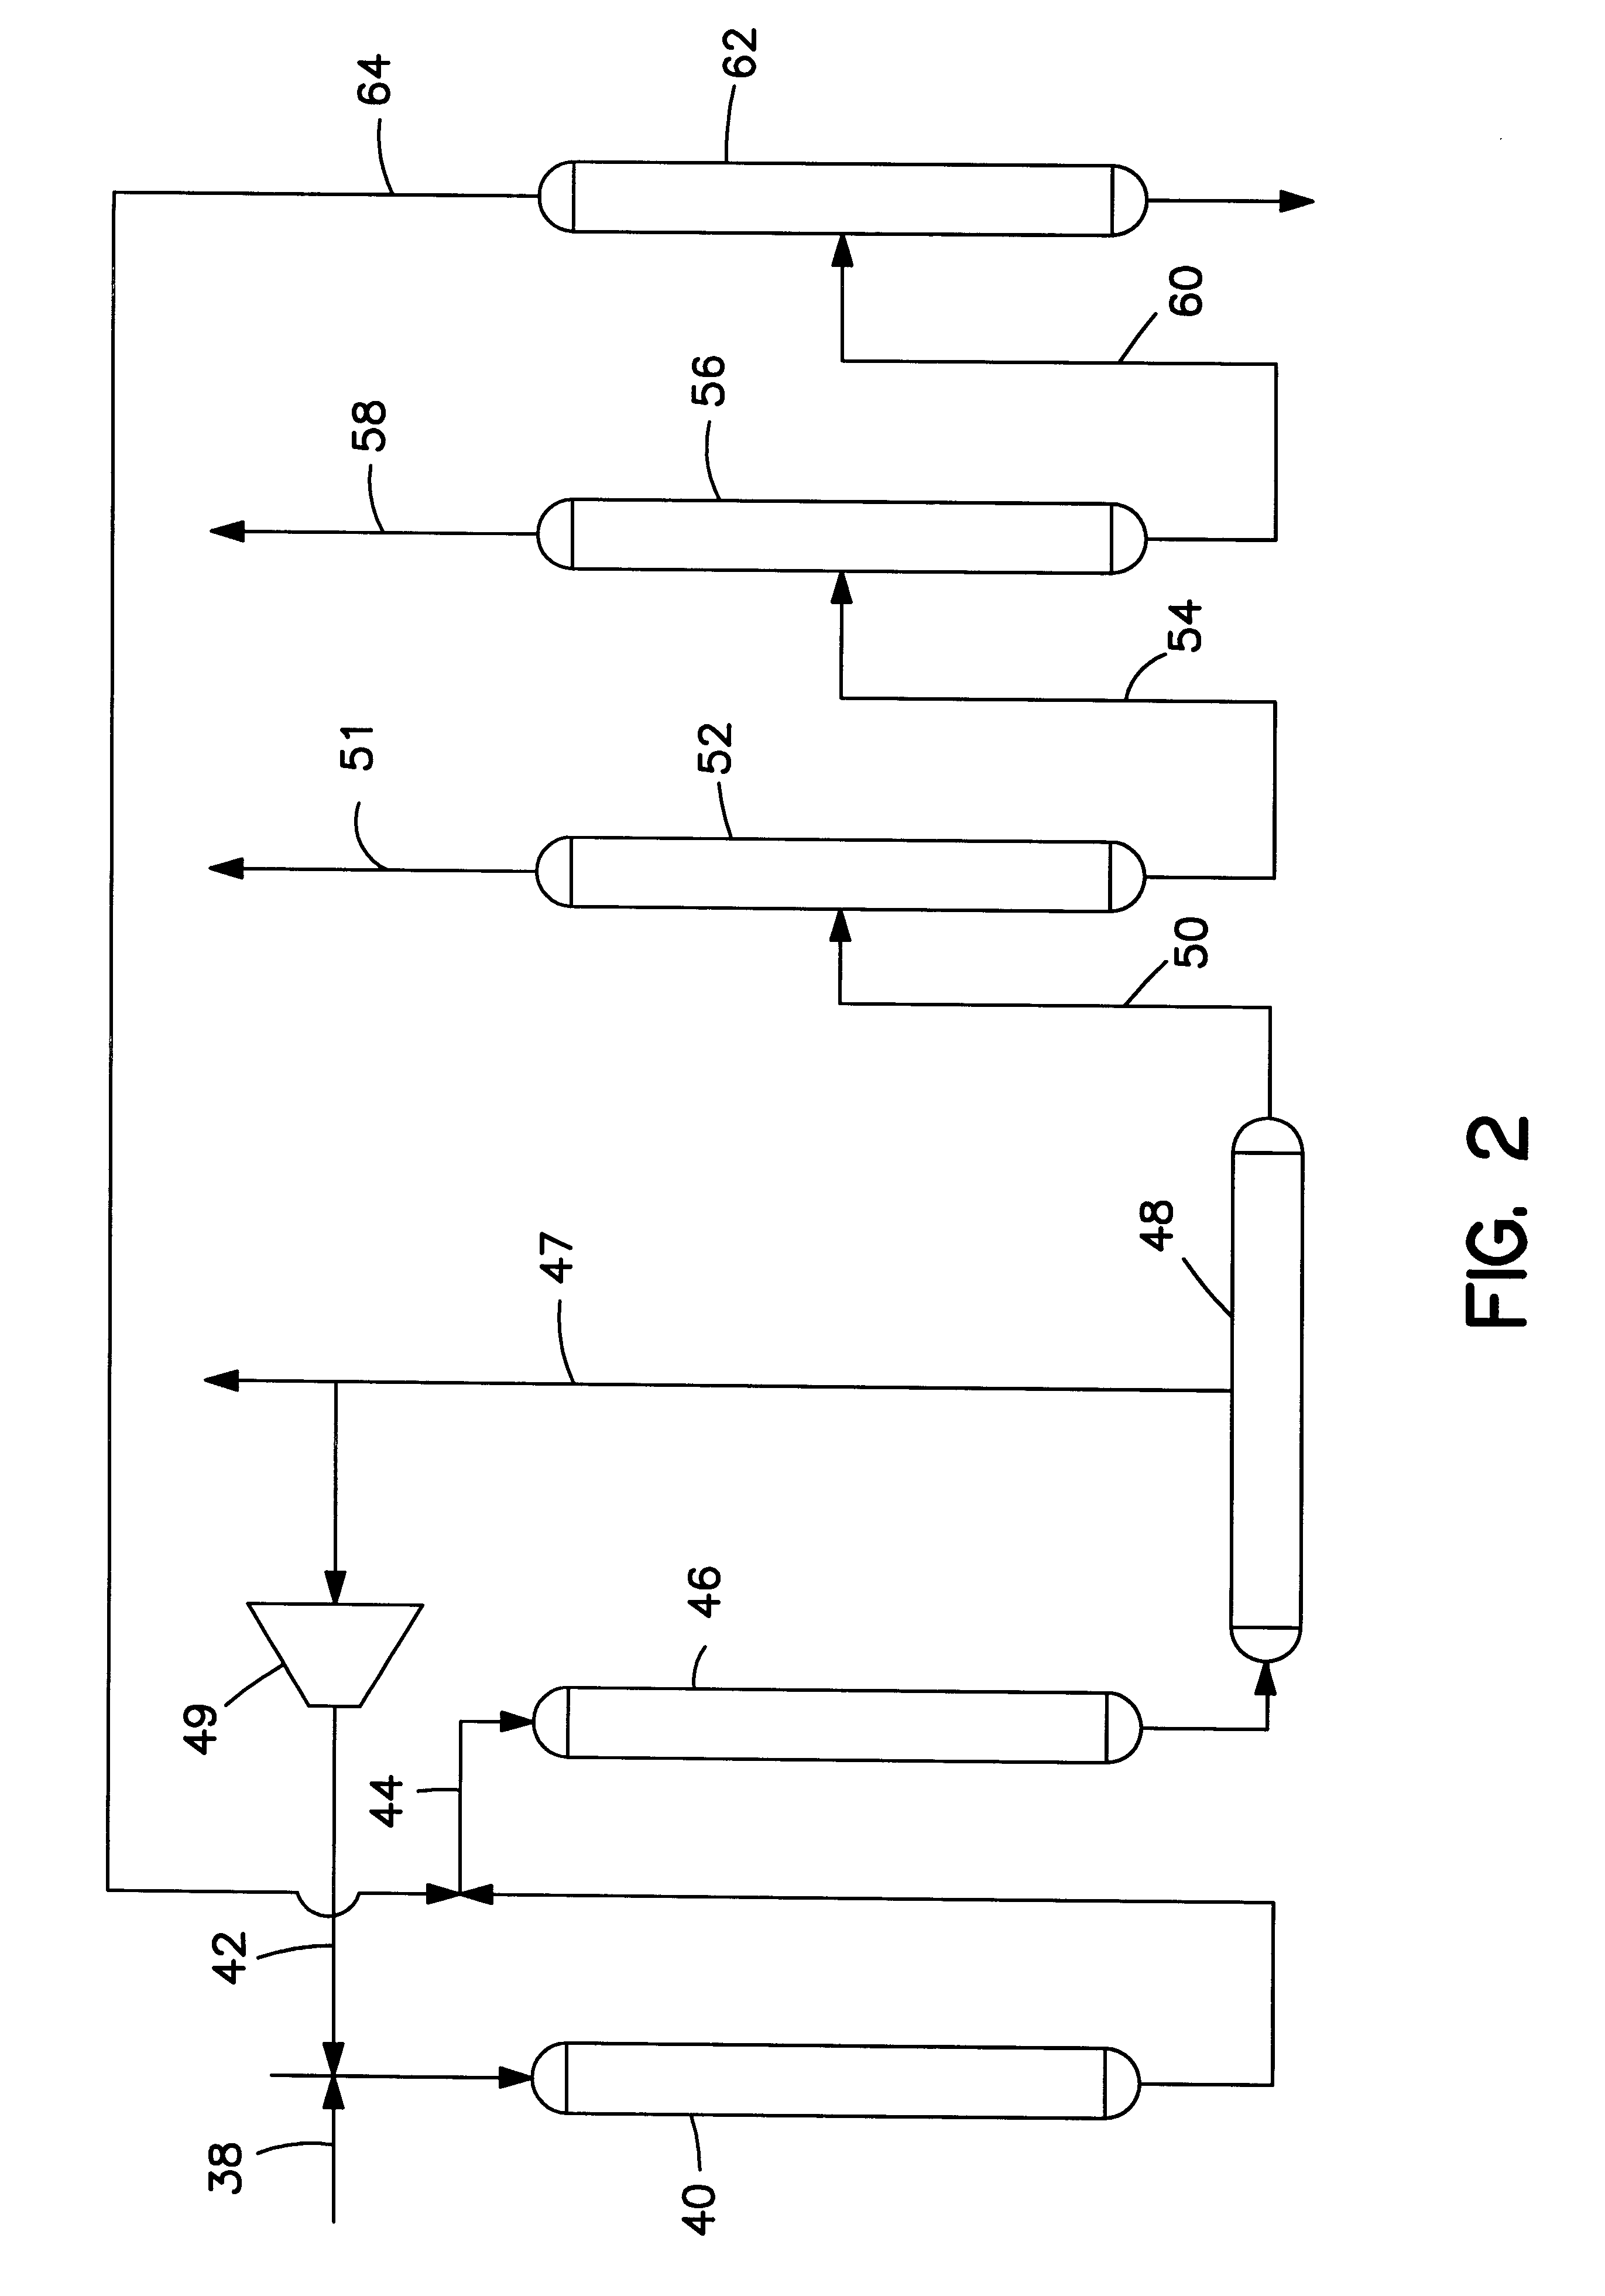 Manufacture of high purity benzene and para-rich xylenes by combining aromatization and selective disproportionation of impure toluene